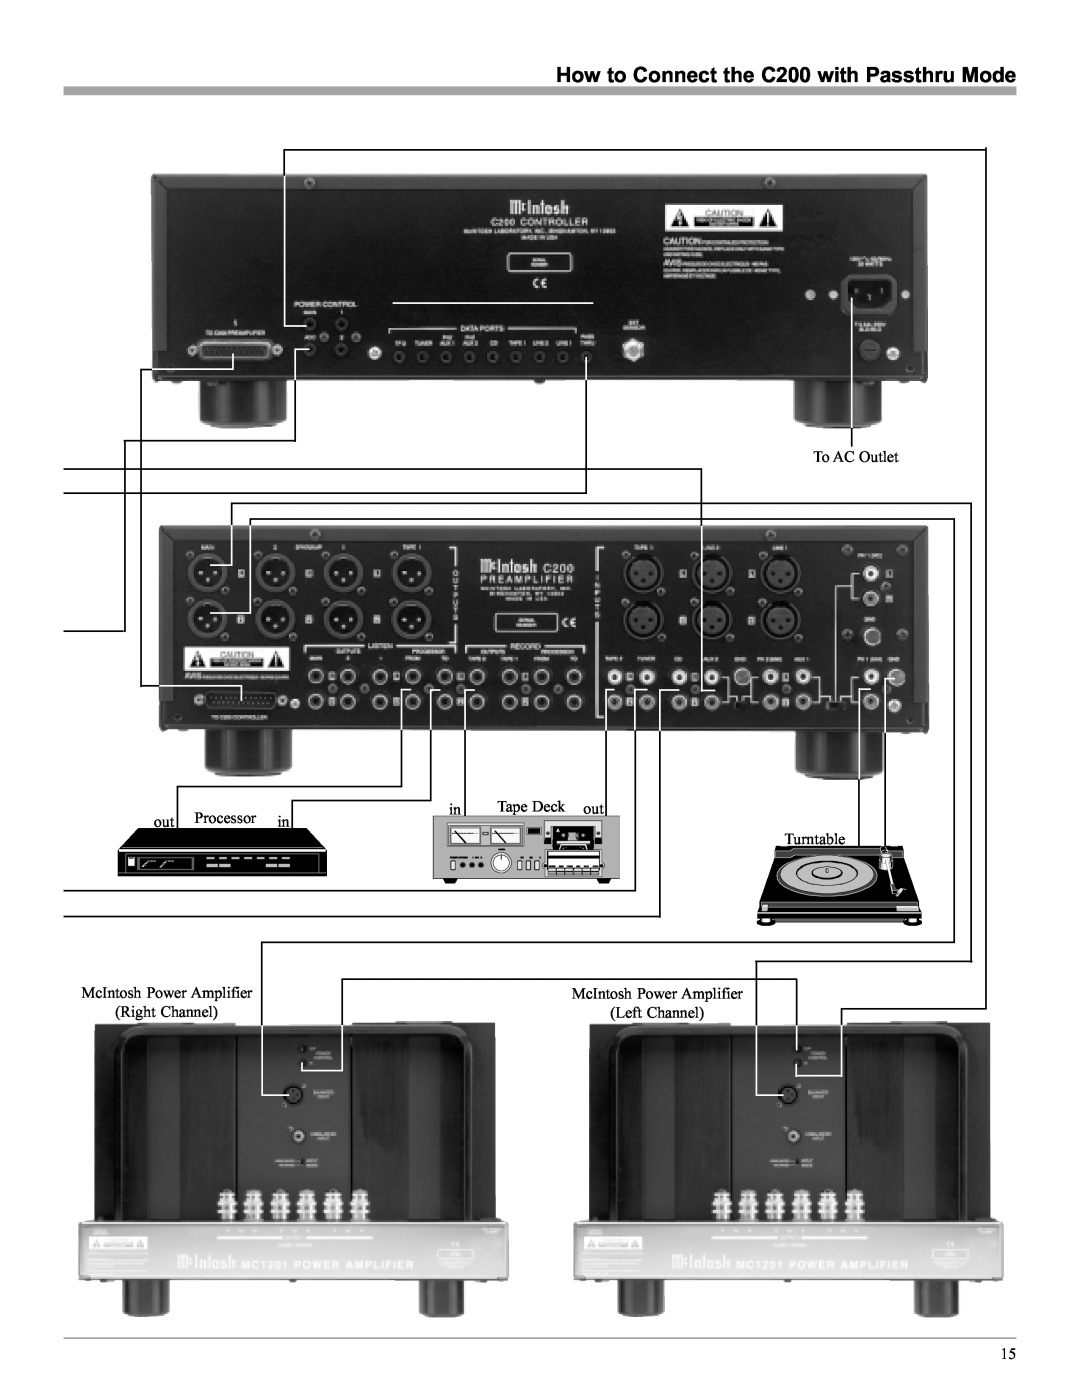 McIntosh manual How to Connect the C200 with Passthru Mode, To AC Outlet, Processor, Tape Deck, McIntosh Power Amplifier 